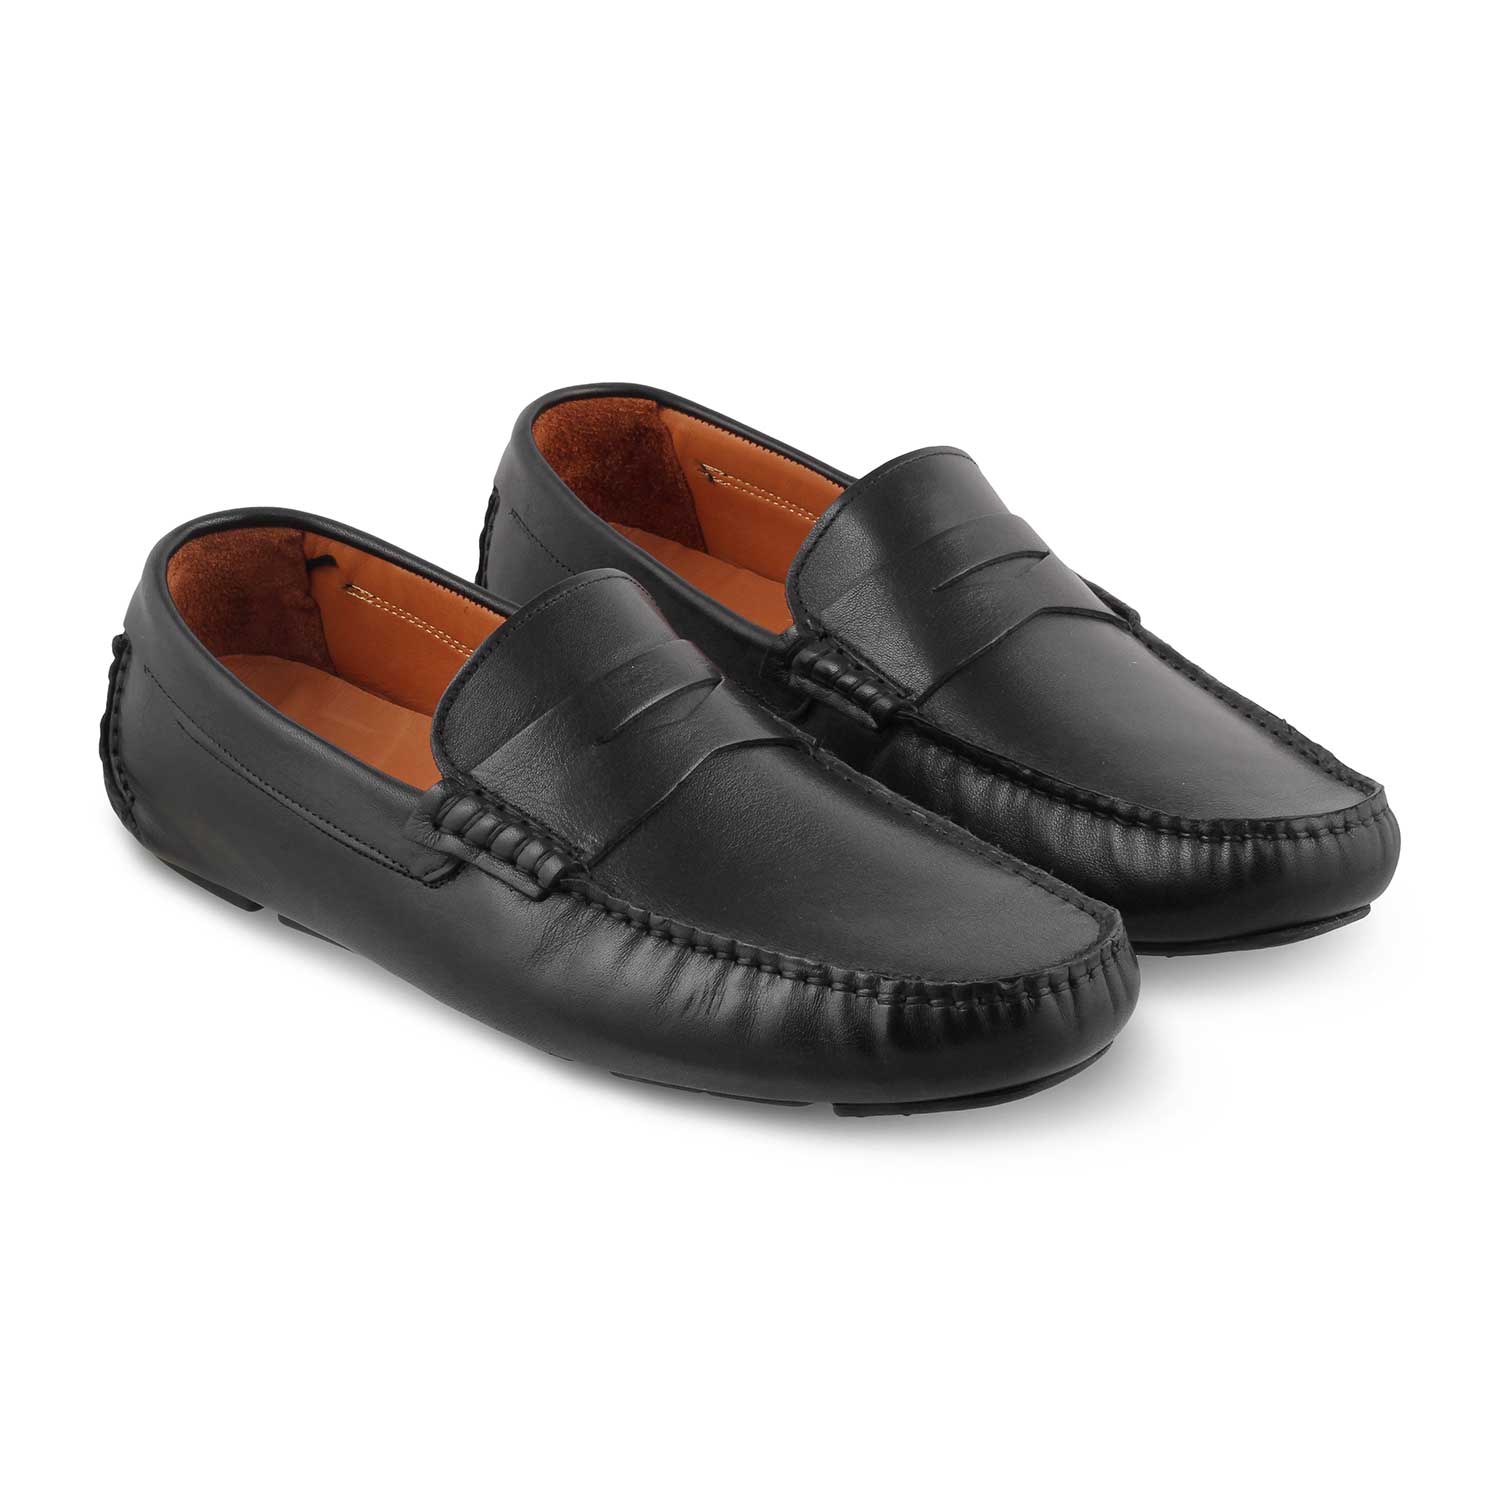 Tresmode-The Porta Black Men's Leather Driving Loafers Tresmode-Tresmode